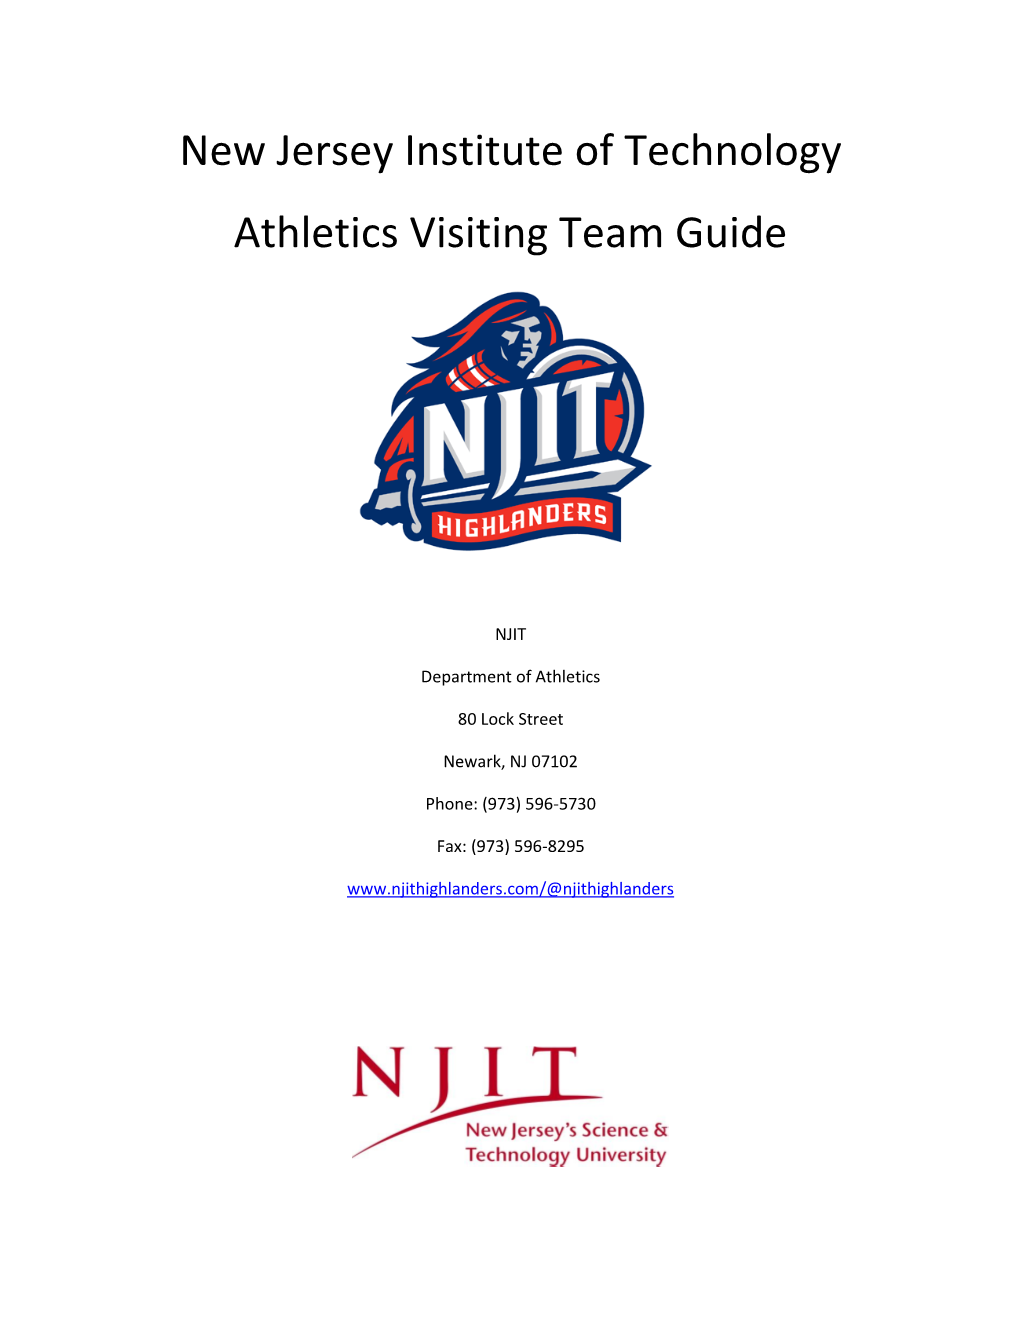 New Jersey Institute of Technology Athletics Visiting Team Guide